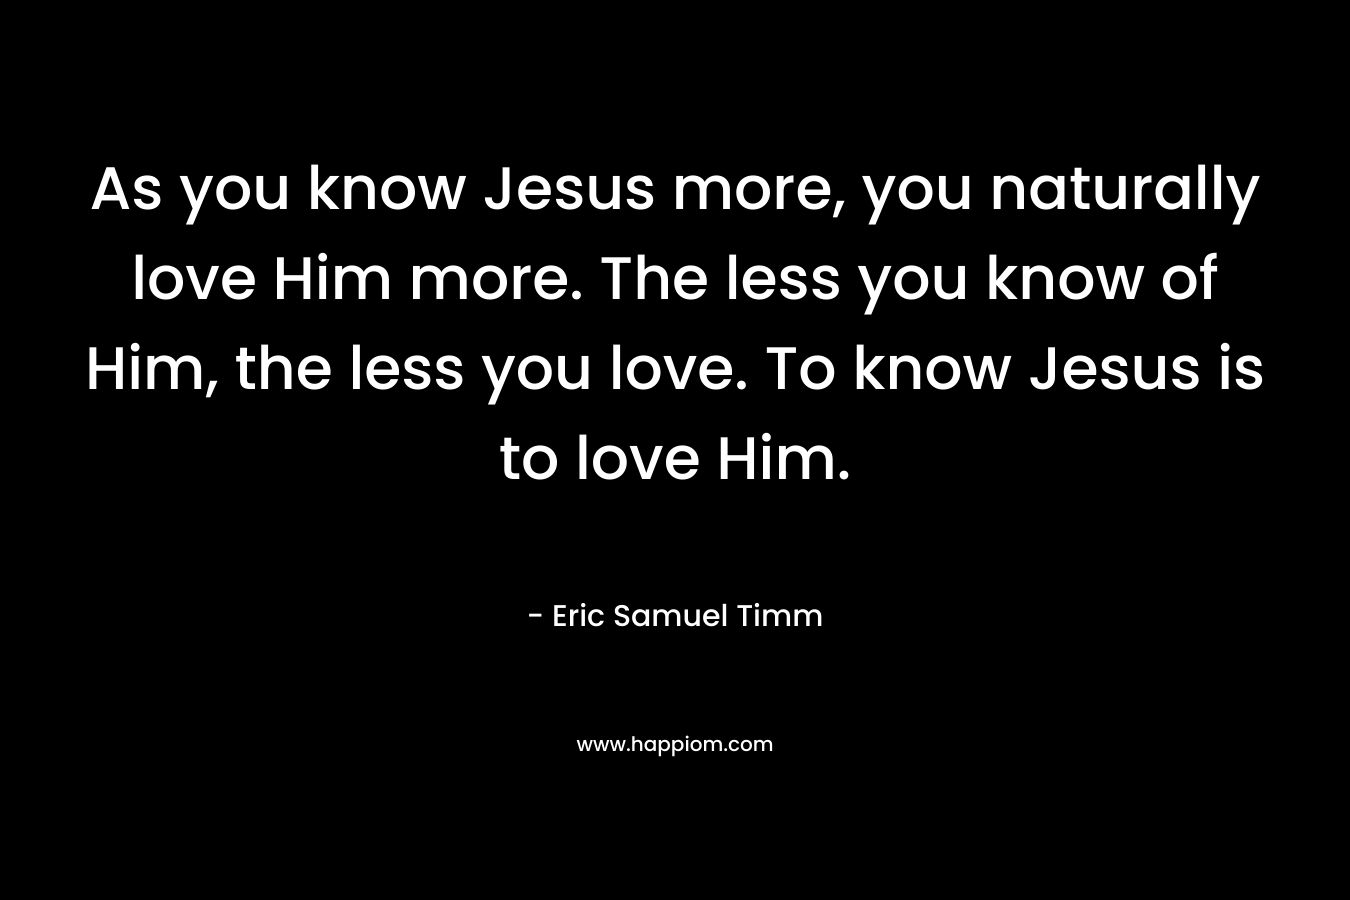 As you know Jesus more, you naturally love Him more. The less you know of Him, the less you love. To know Jesus is to love Him.